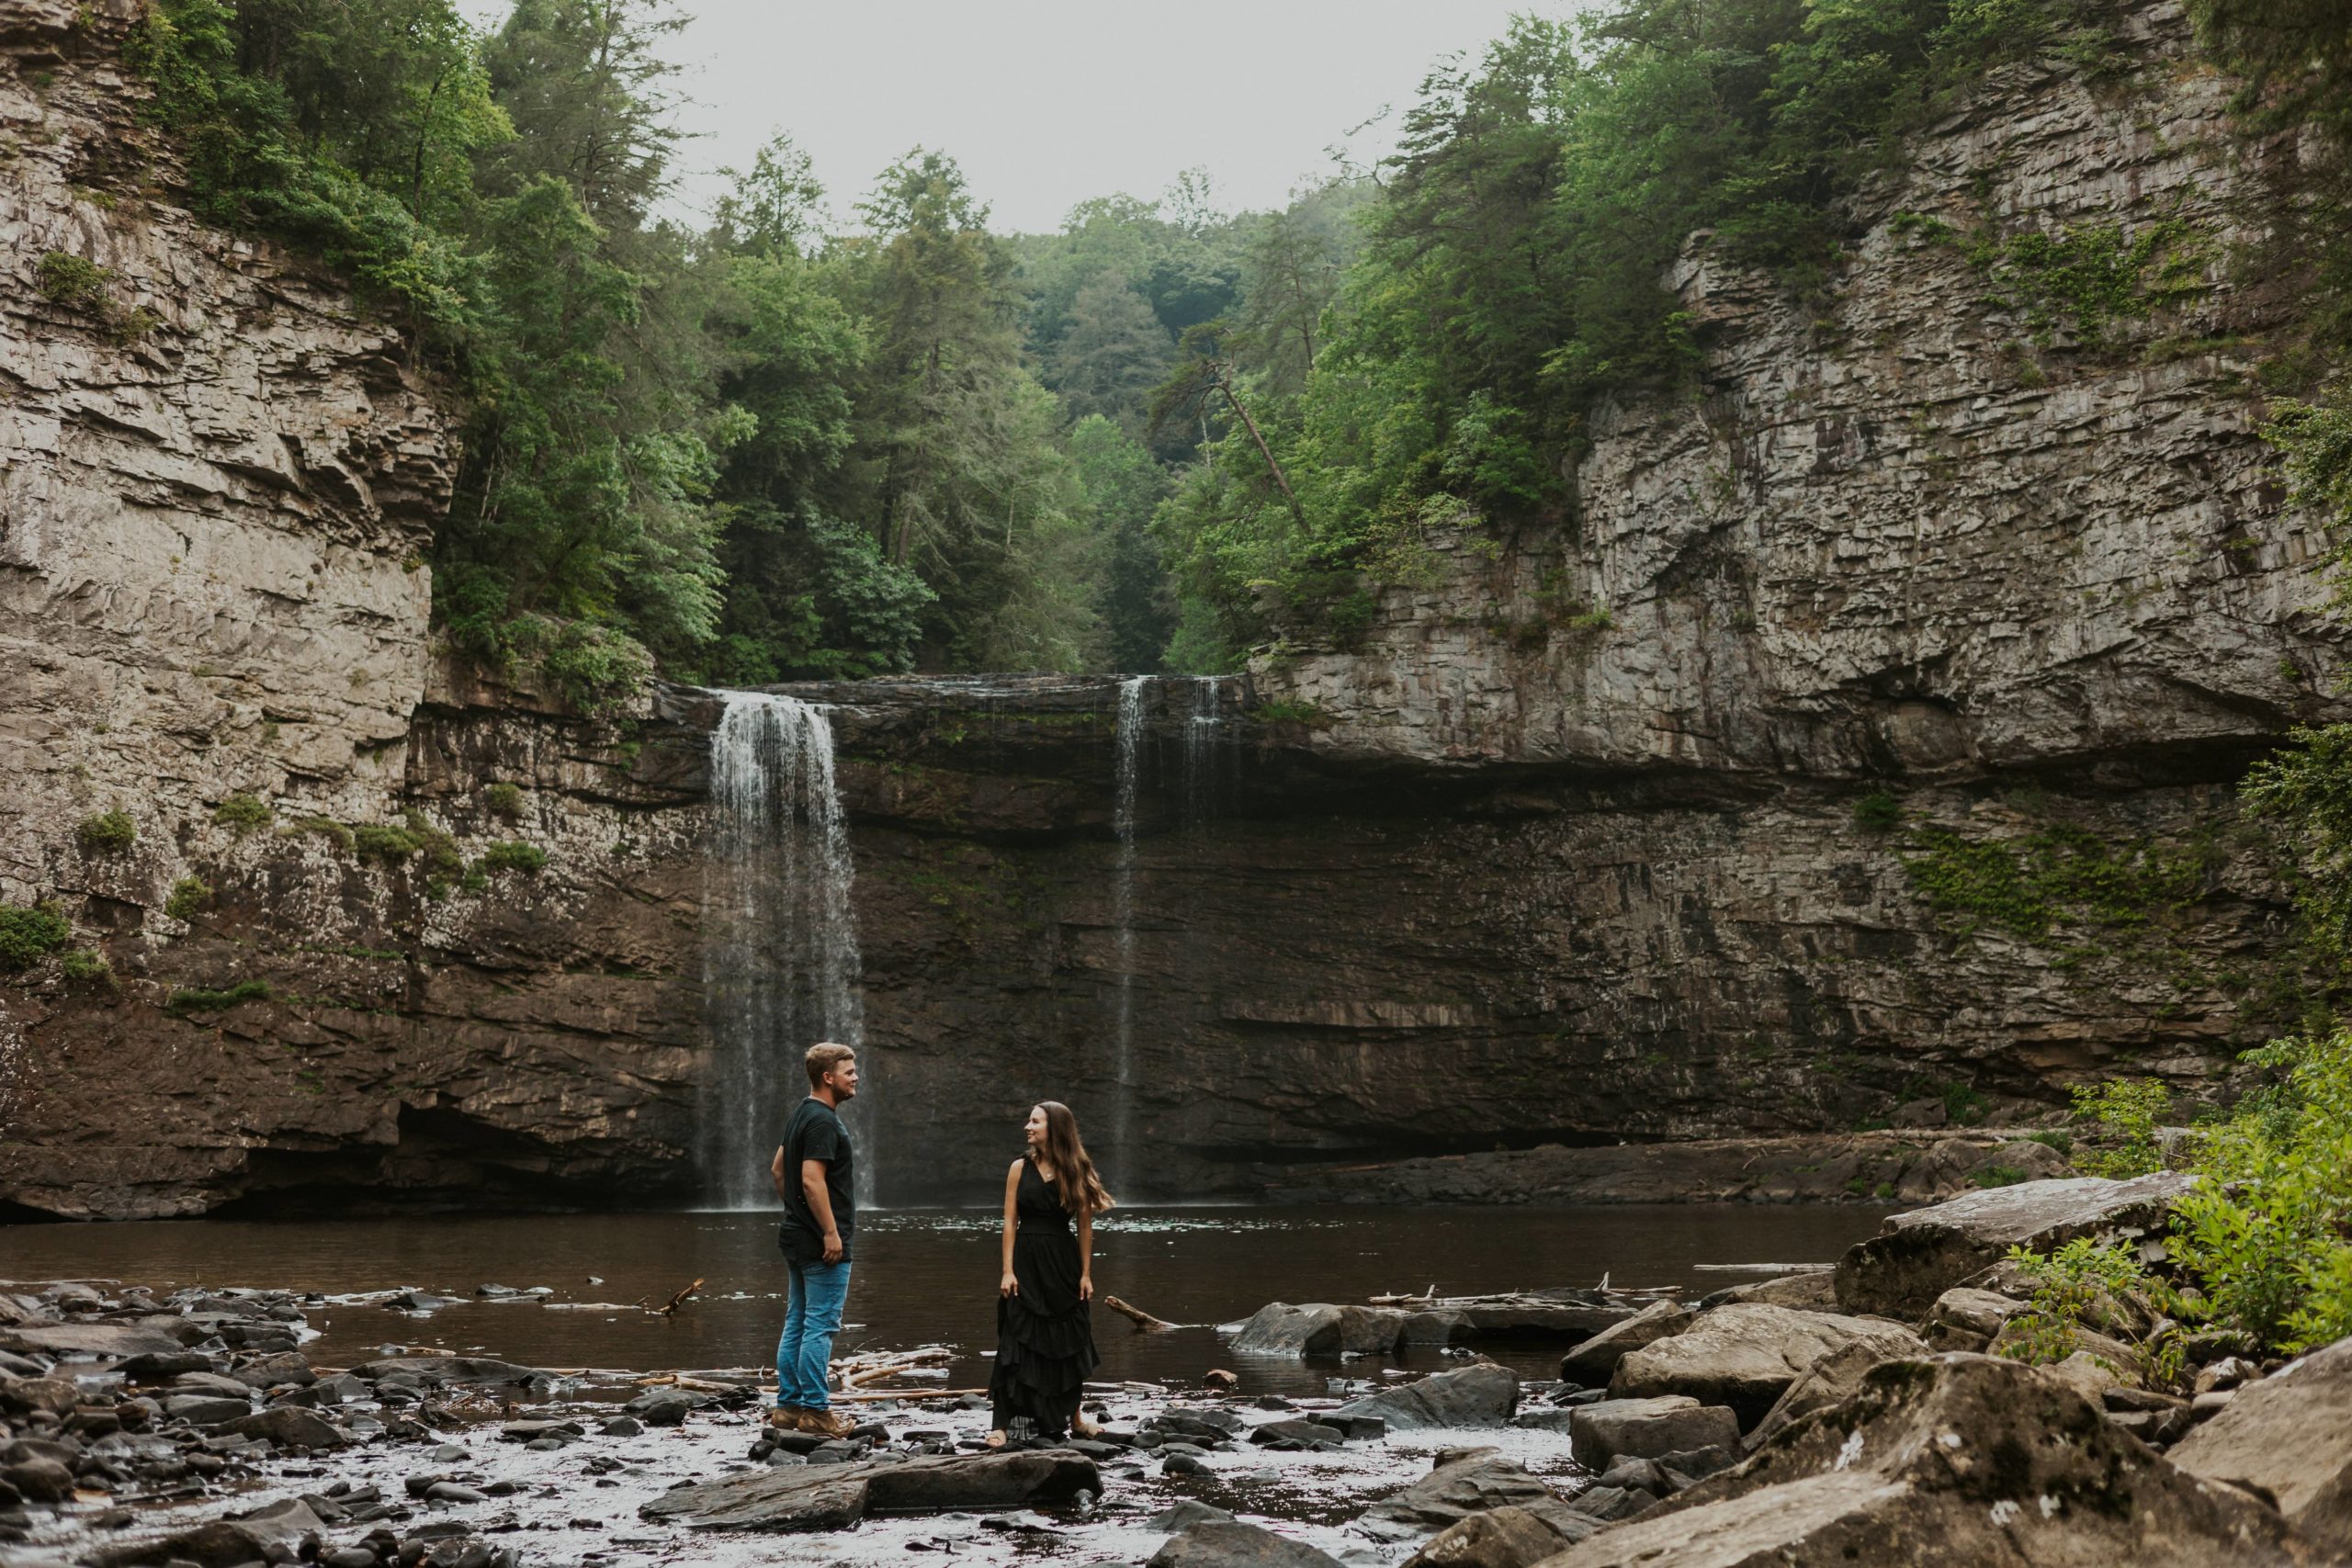 Sydnie and Austin walking across the rocks underneath a waterfall at Fall Creek Falls for their engagement photos.